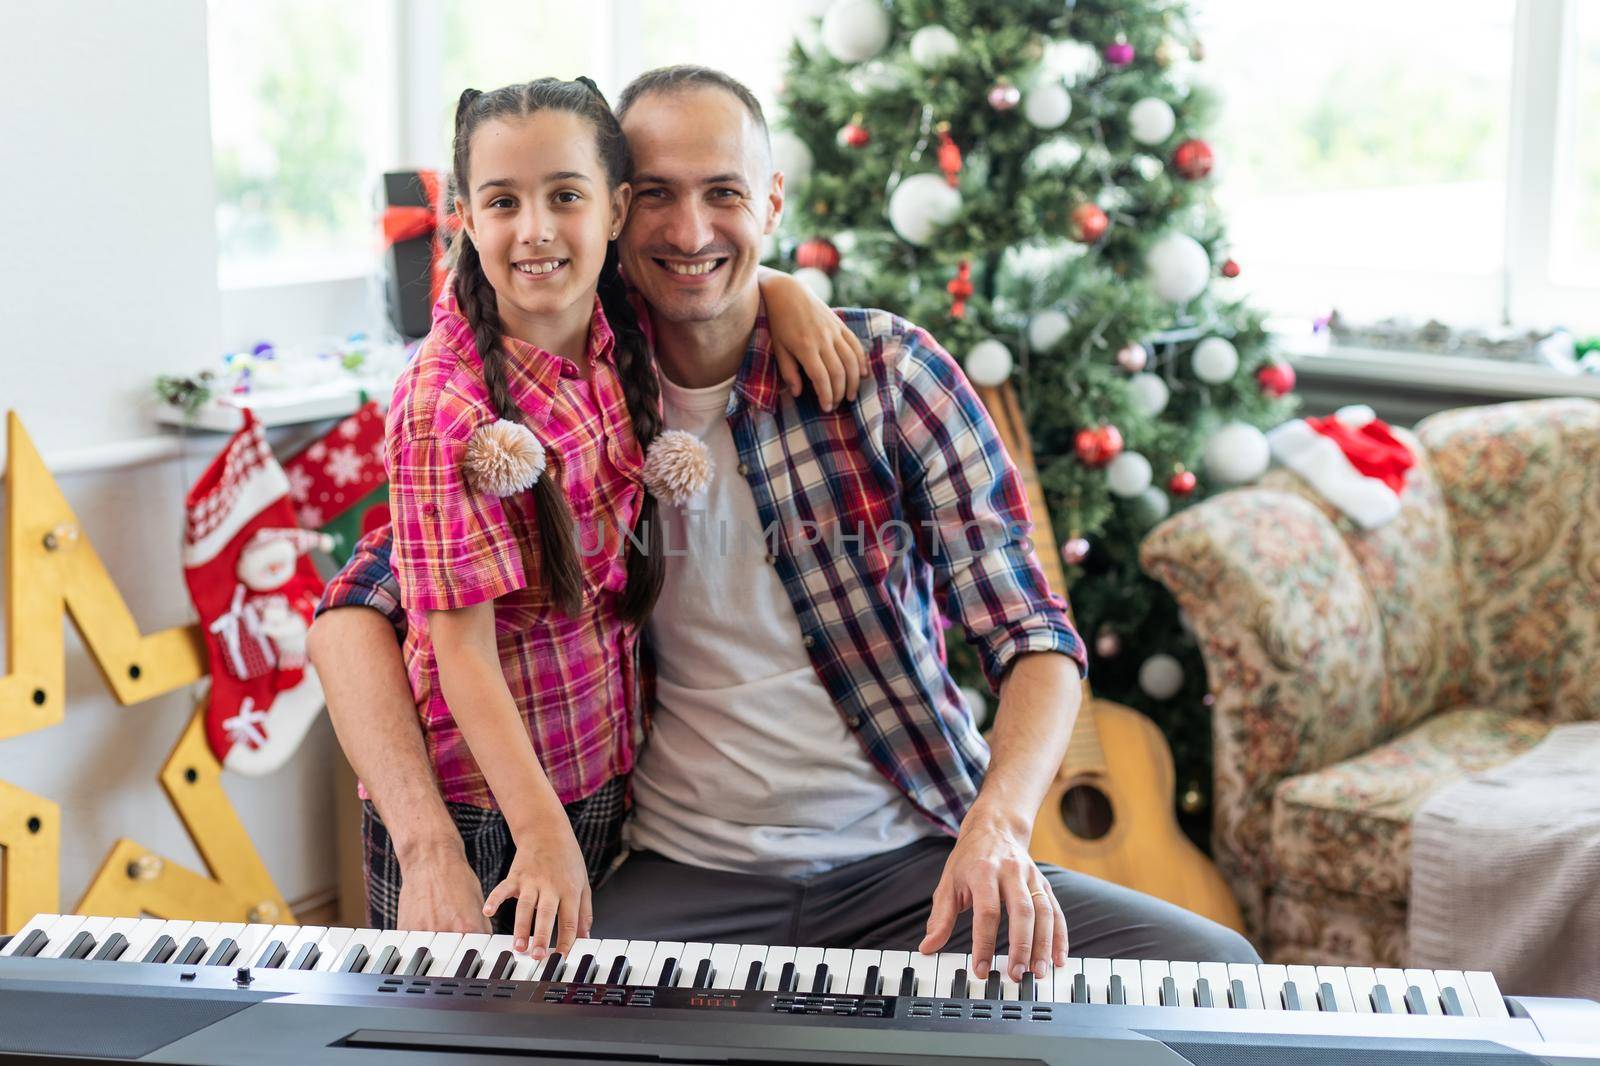 father and daughter at the piano with Christmas decor.